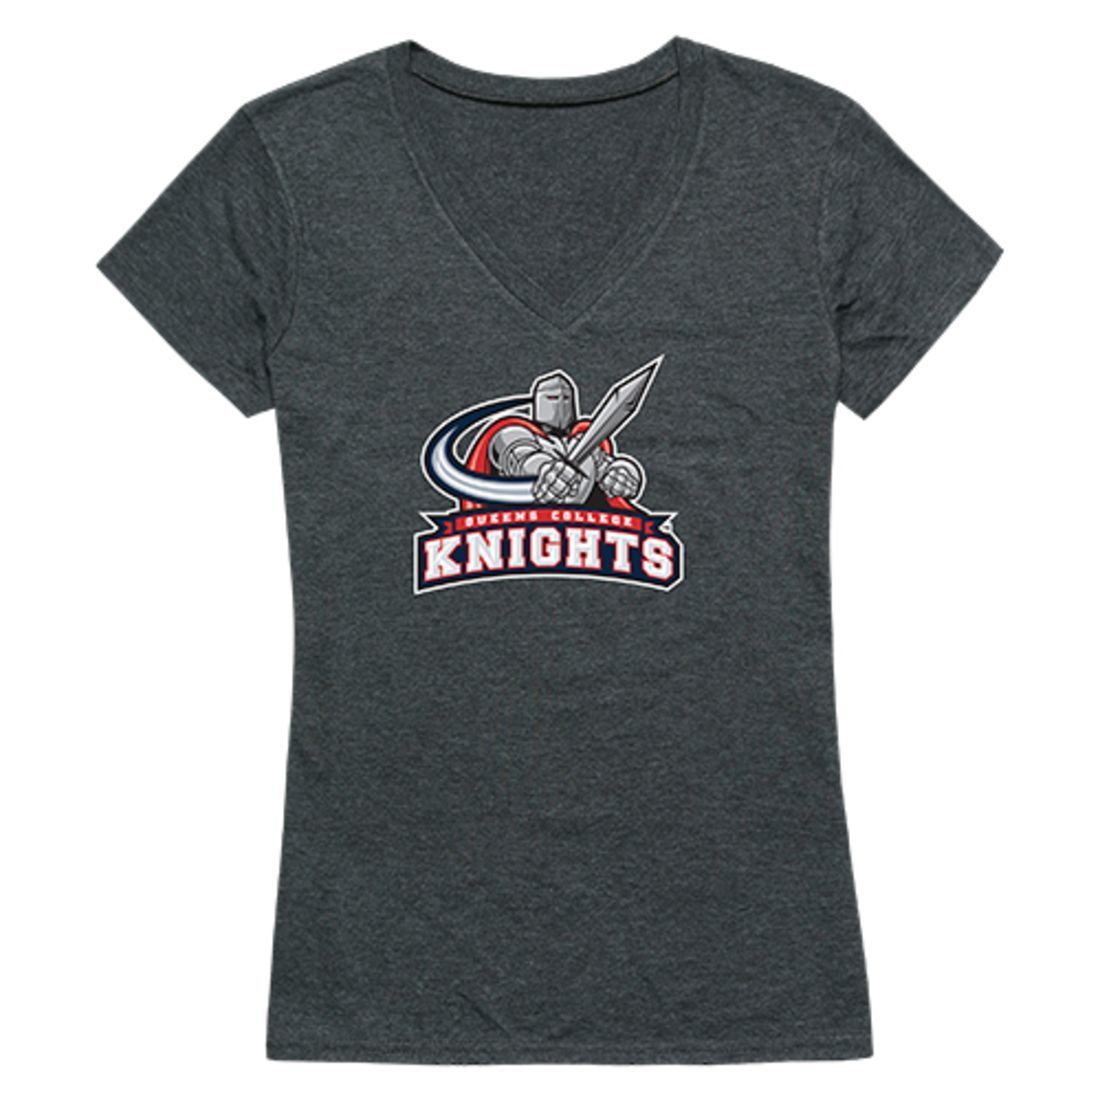 CUNY Queens College Knights Womens Cinder T-Shirt Heather Charcoal-Campus-Wardrobe